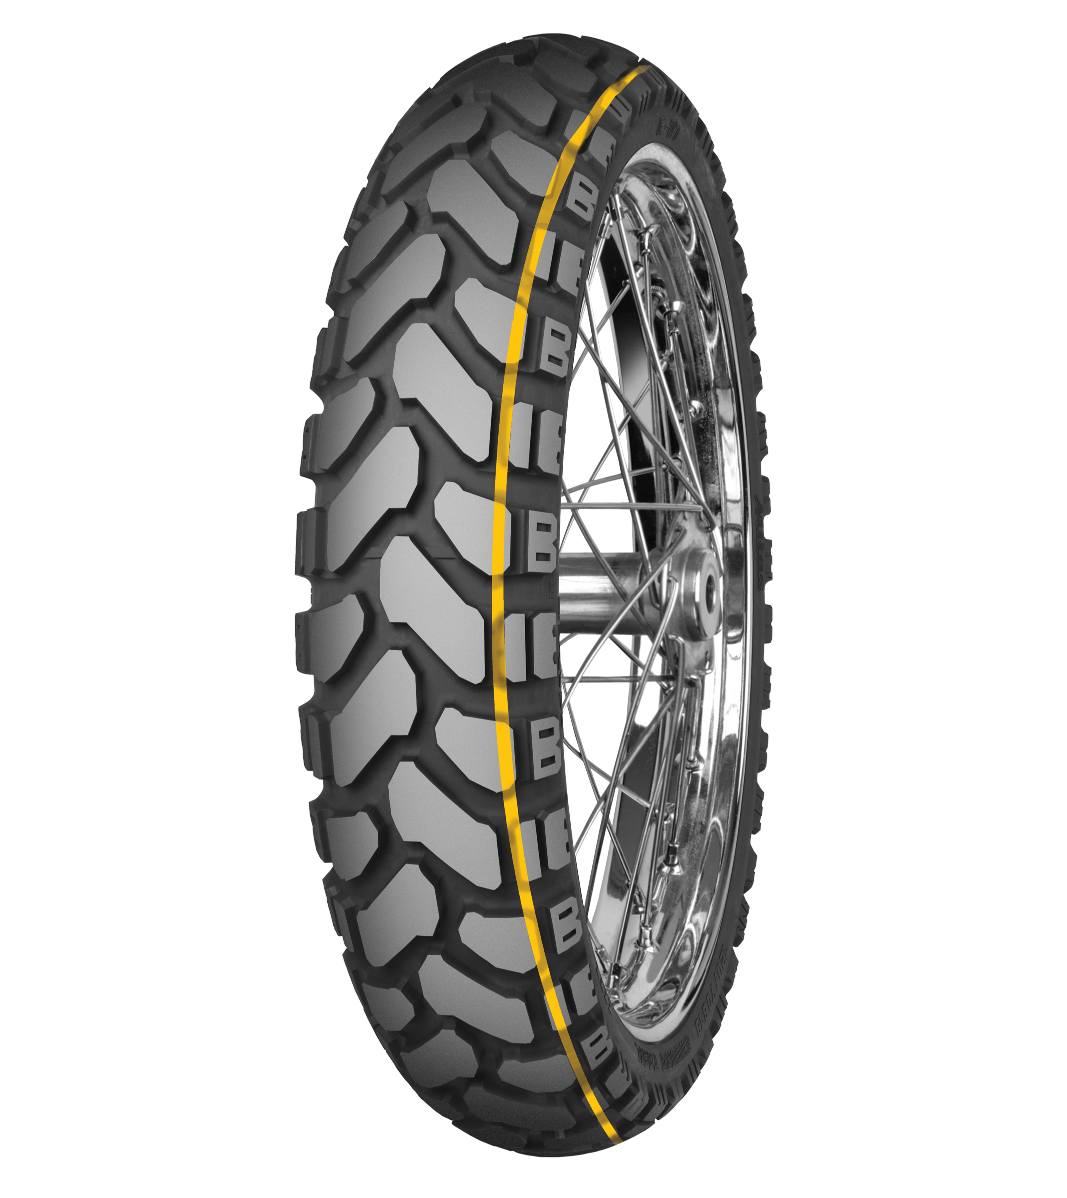 Mitas E-07+ ENDURO TRAIL 90/90B21 Trail ON Trail DAKAR 54T Yellow Tubeless Front Tire, 224657, 90/90B21, Adventure Touring, E Series, E-07+ Enduro Trail, Front, Trail, Trail ON, Tires - Imported and distributed in North &amp; South America by Lindeco Genuine Powersports - Premier Powersports Equipment and Accessories for Motorcycle Enthusiasts, Professional Riders and Dealers.